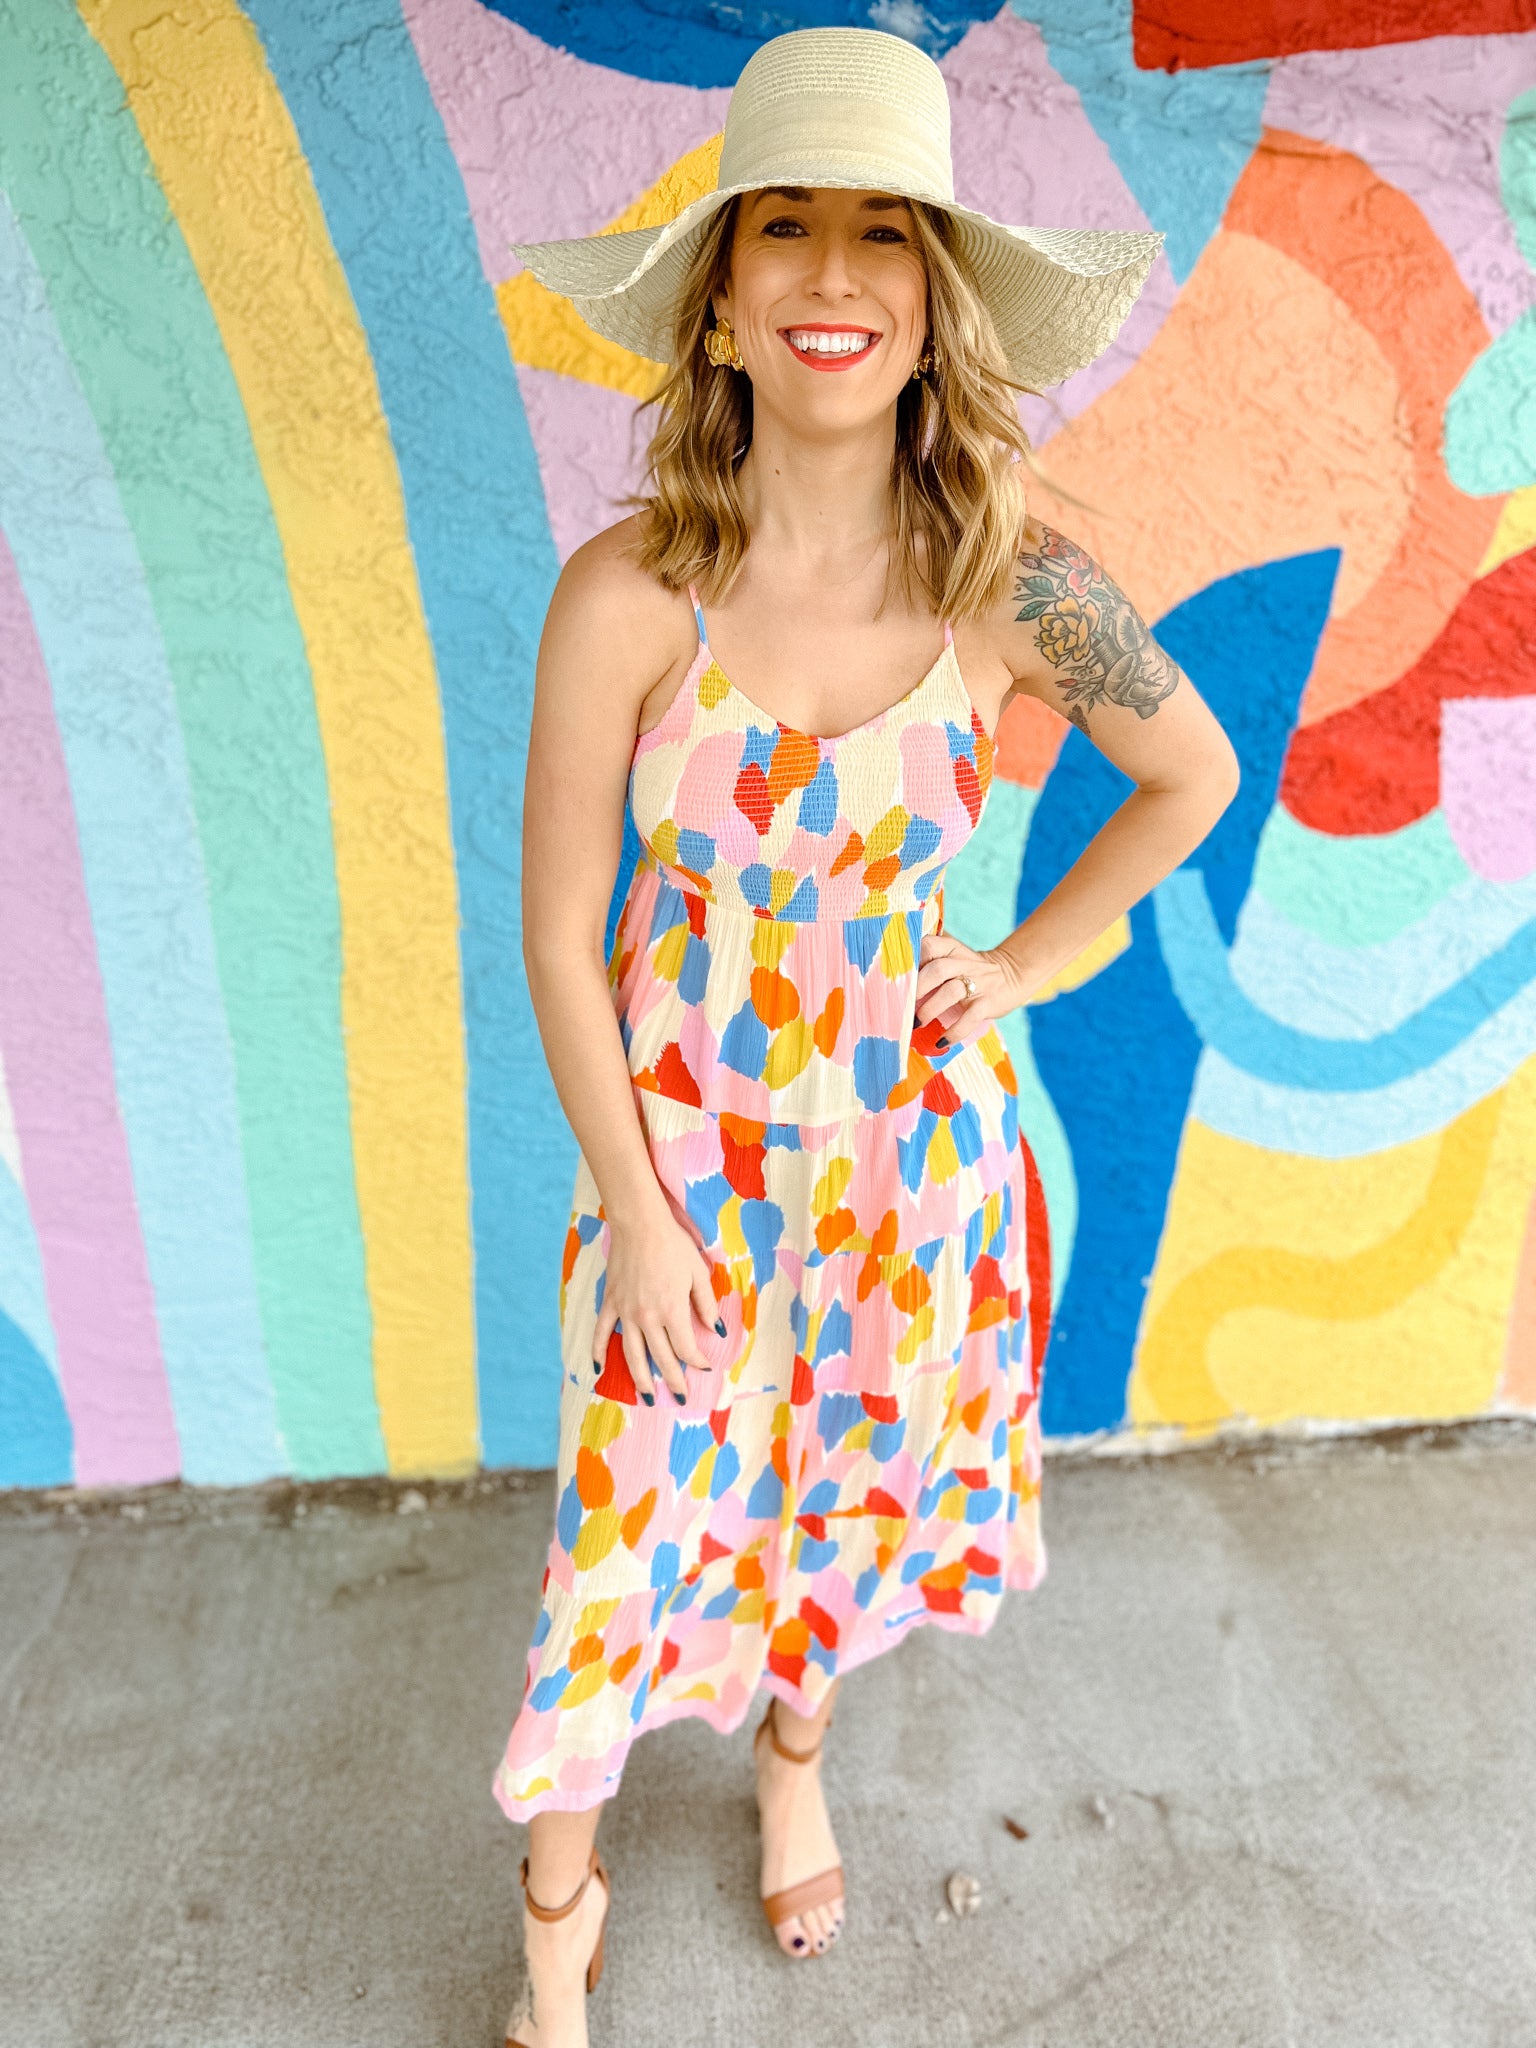 Southern Belle Smocked Multicolor Midi Dress - Oatmeal + Oxford Blue + Geranium Pink